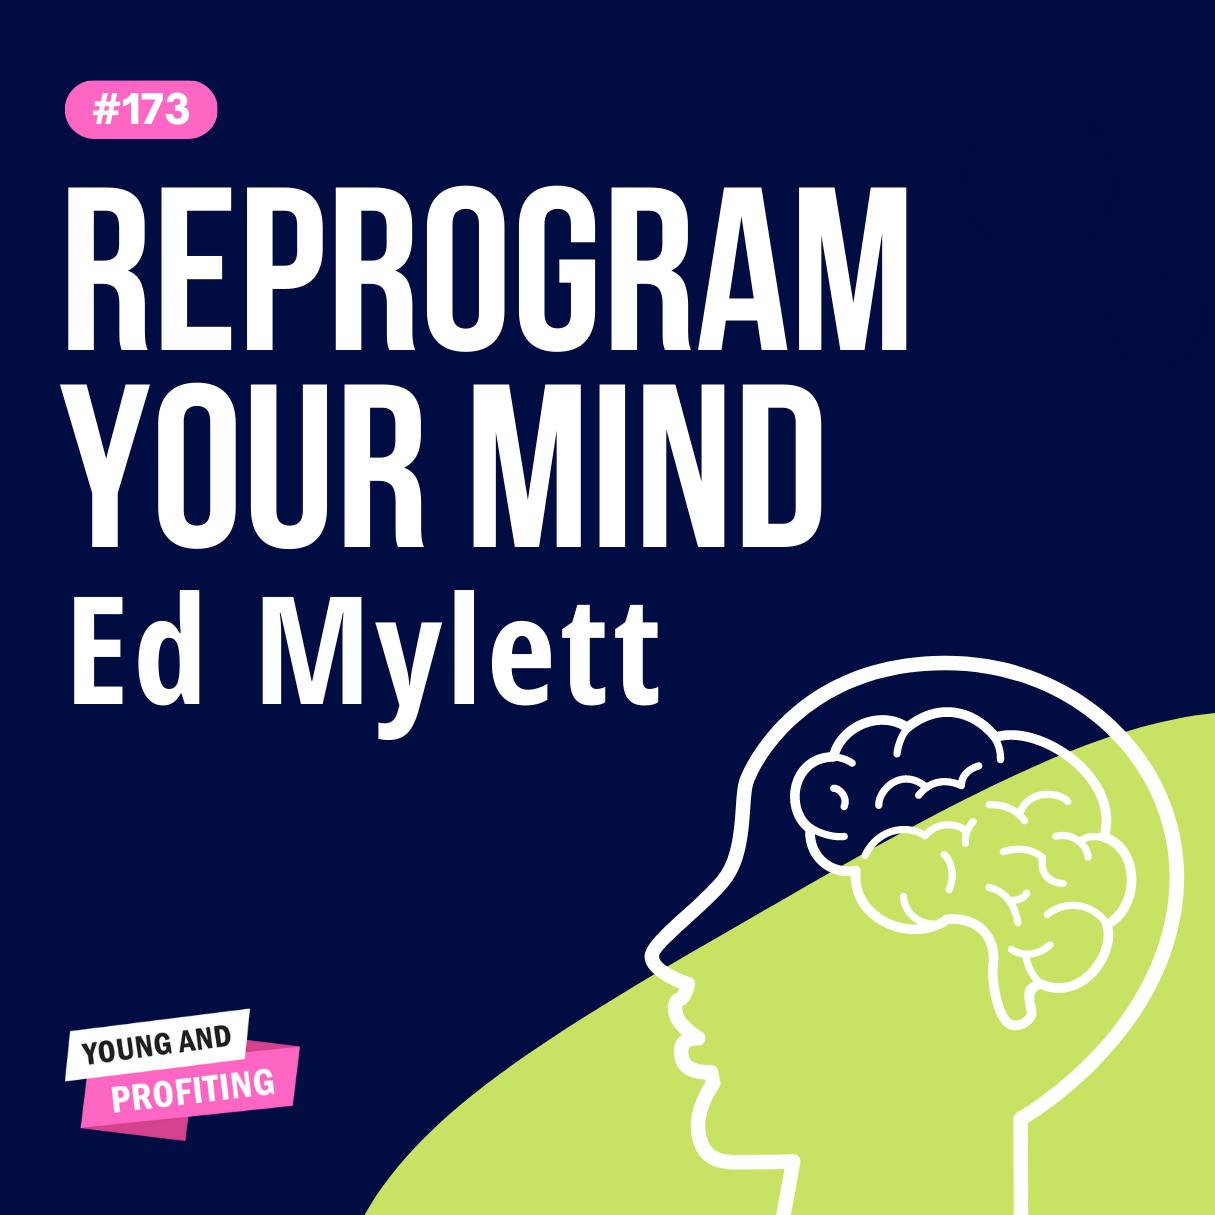 YAPClassic: Ed Mylett on The Power of One More, How to Reprogram Your Mind to Get What You Want